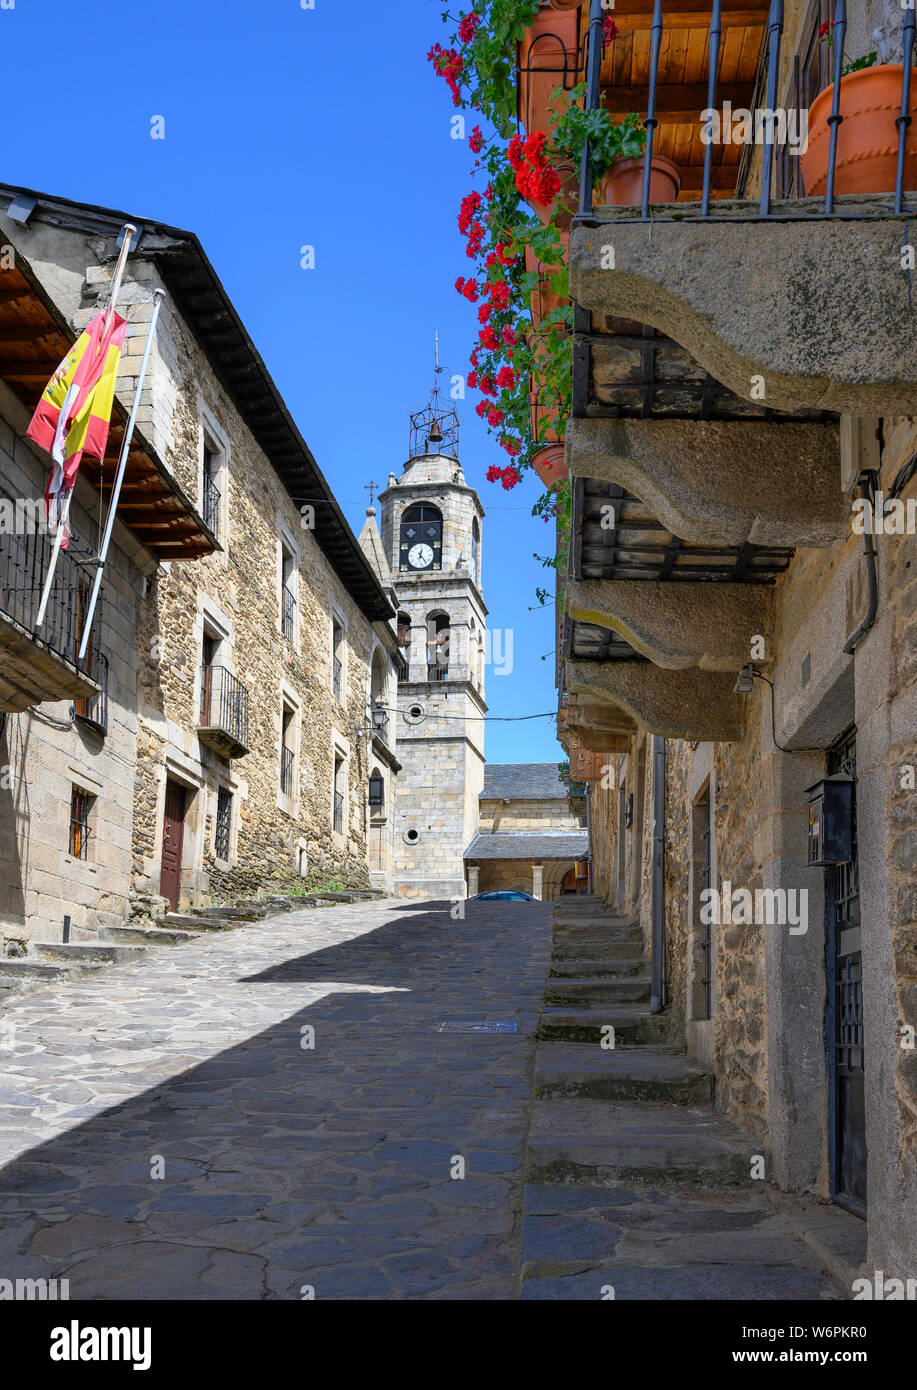 Traditional old houses in the little town of Puebla de Sanabria, with the clock tower of Santa María del Azogue church in the background, North-West Z Stock Photo